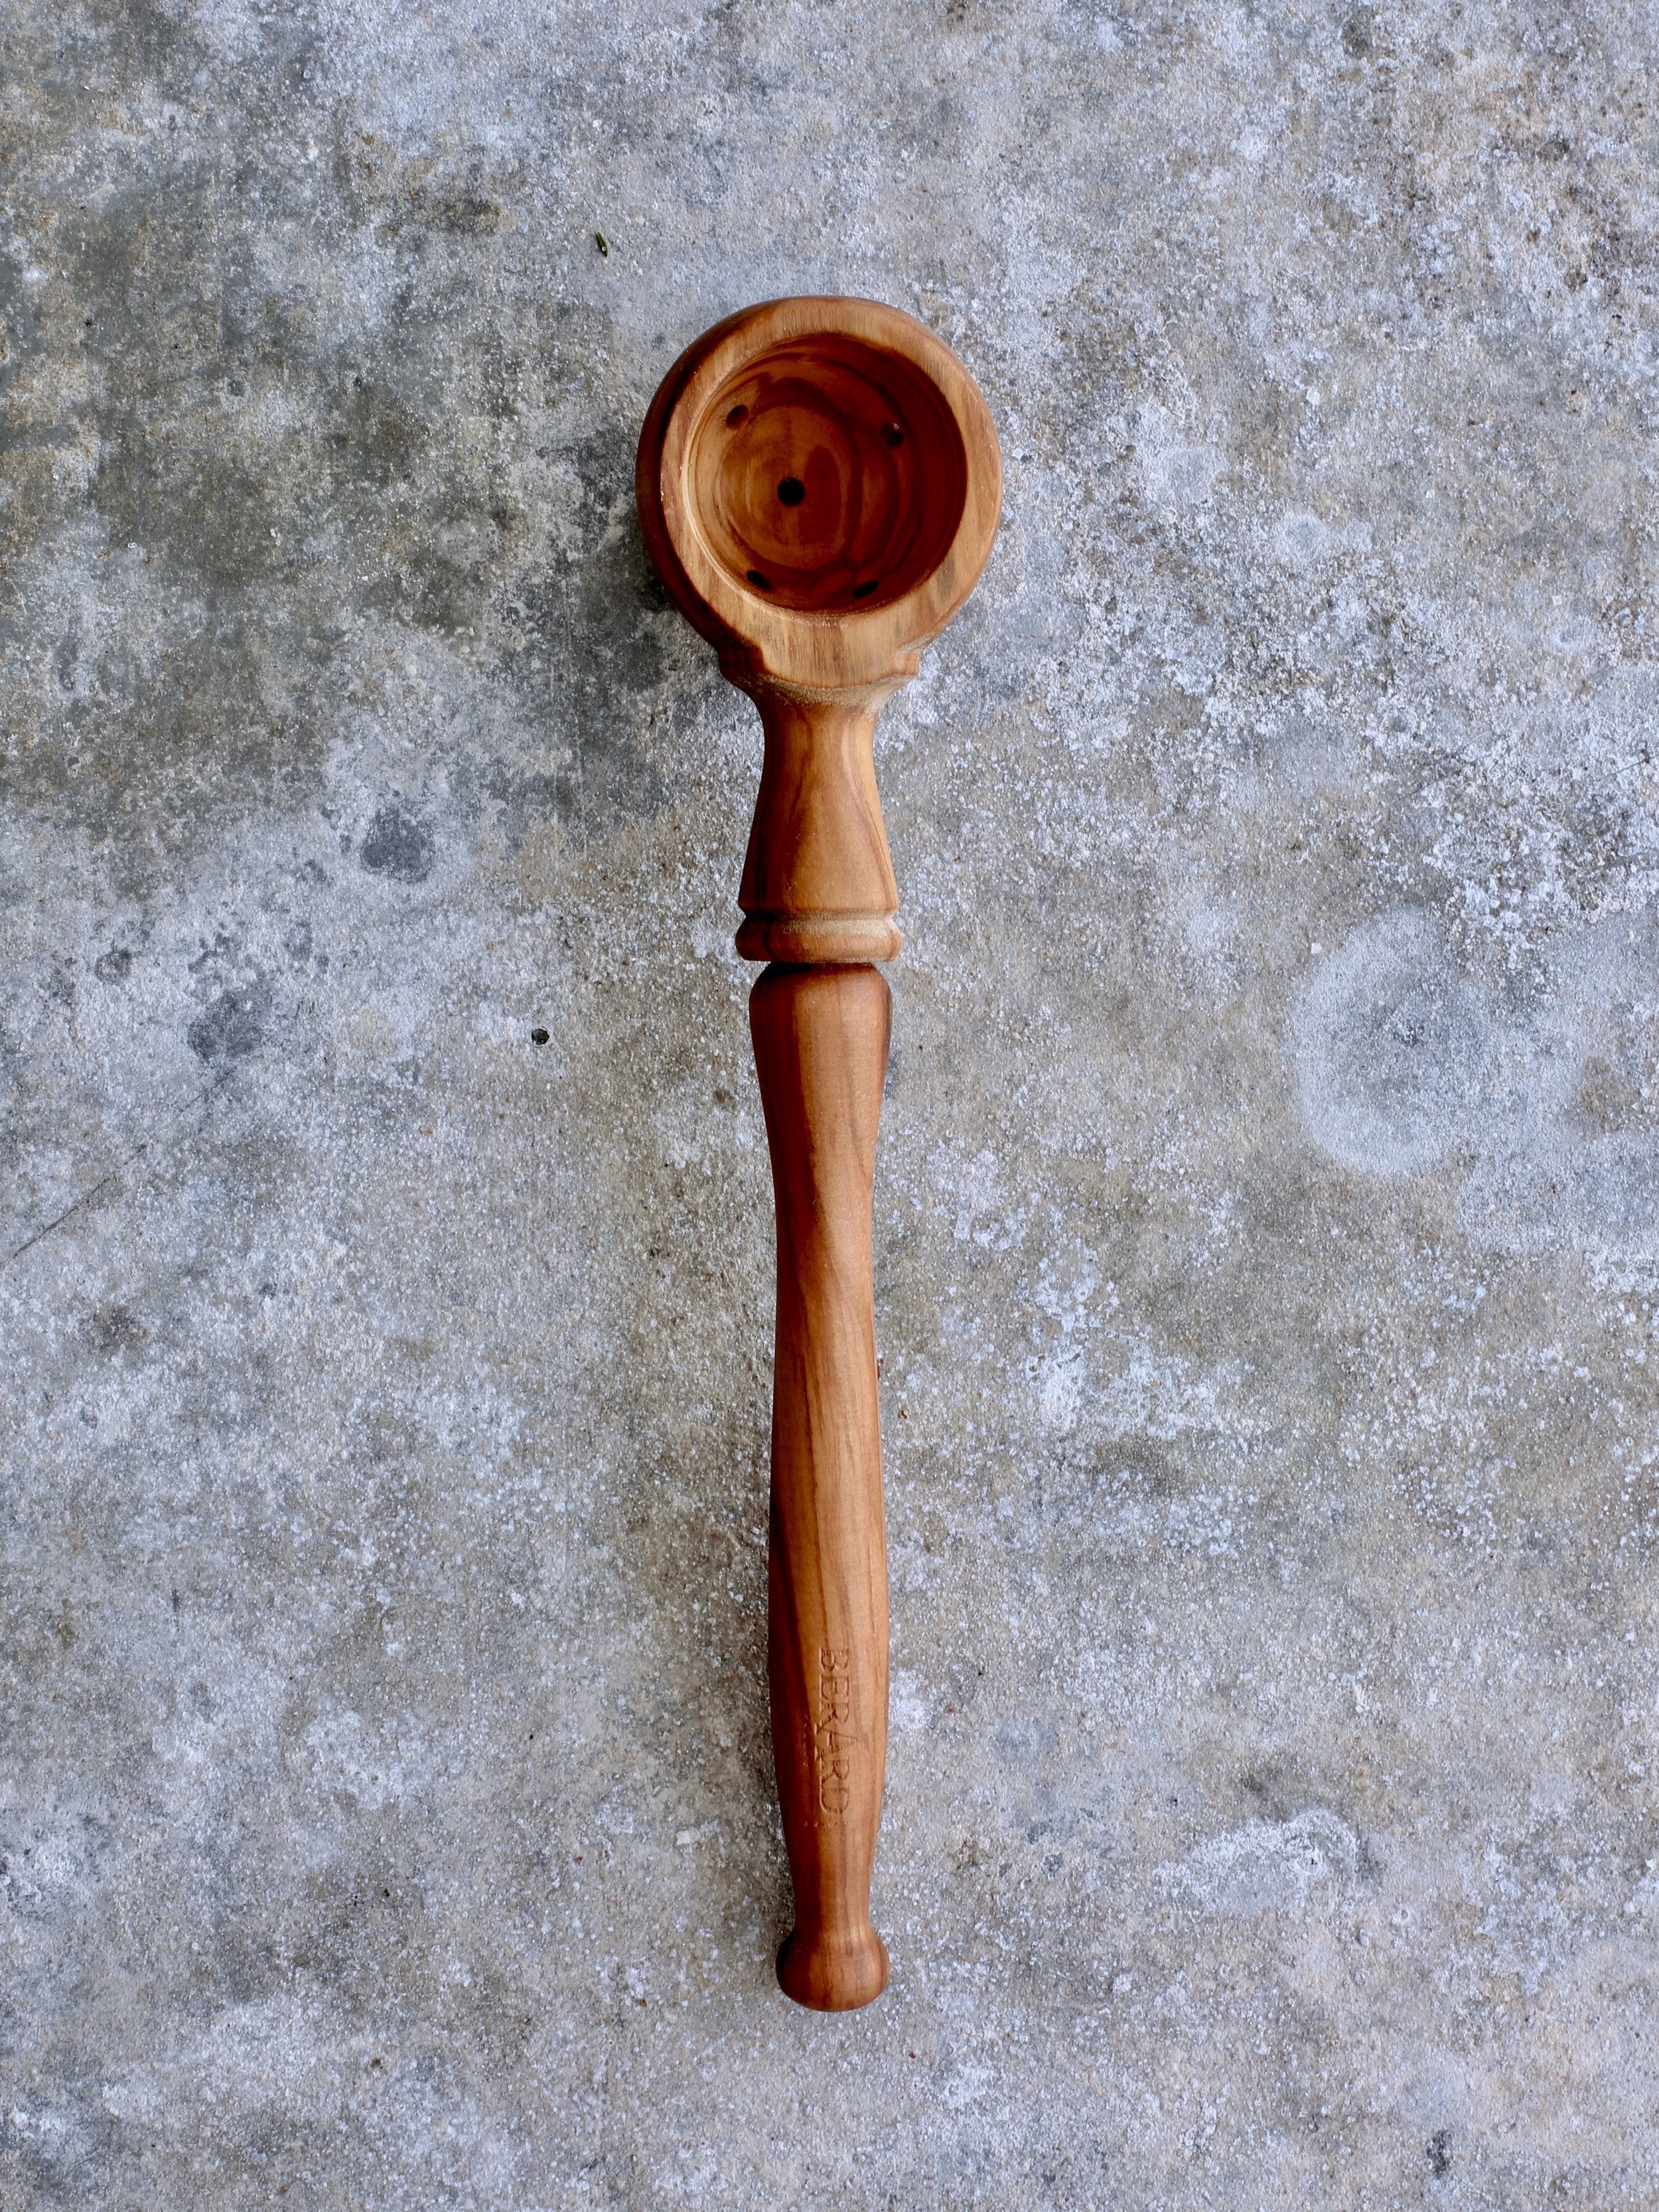 Olive Spoon in Olive Wood